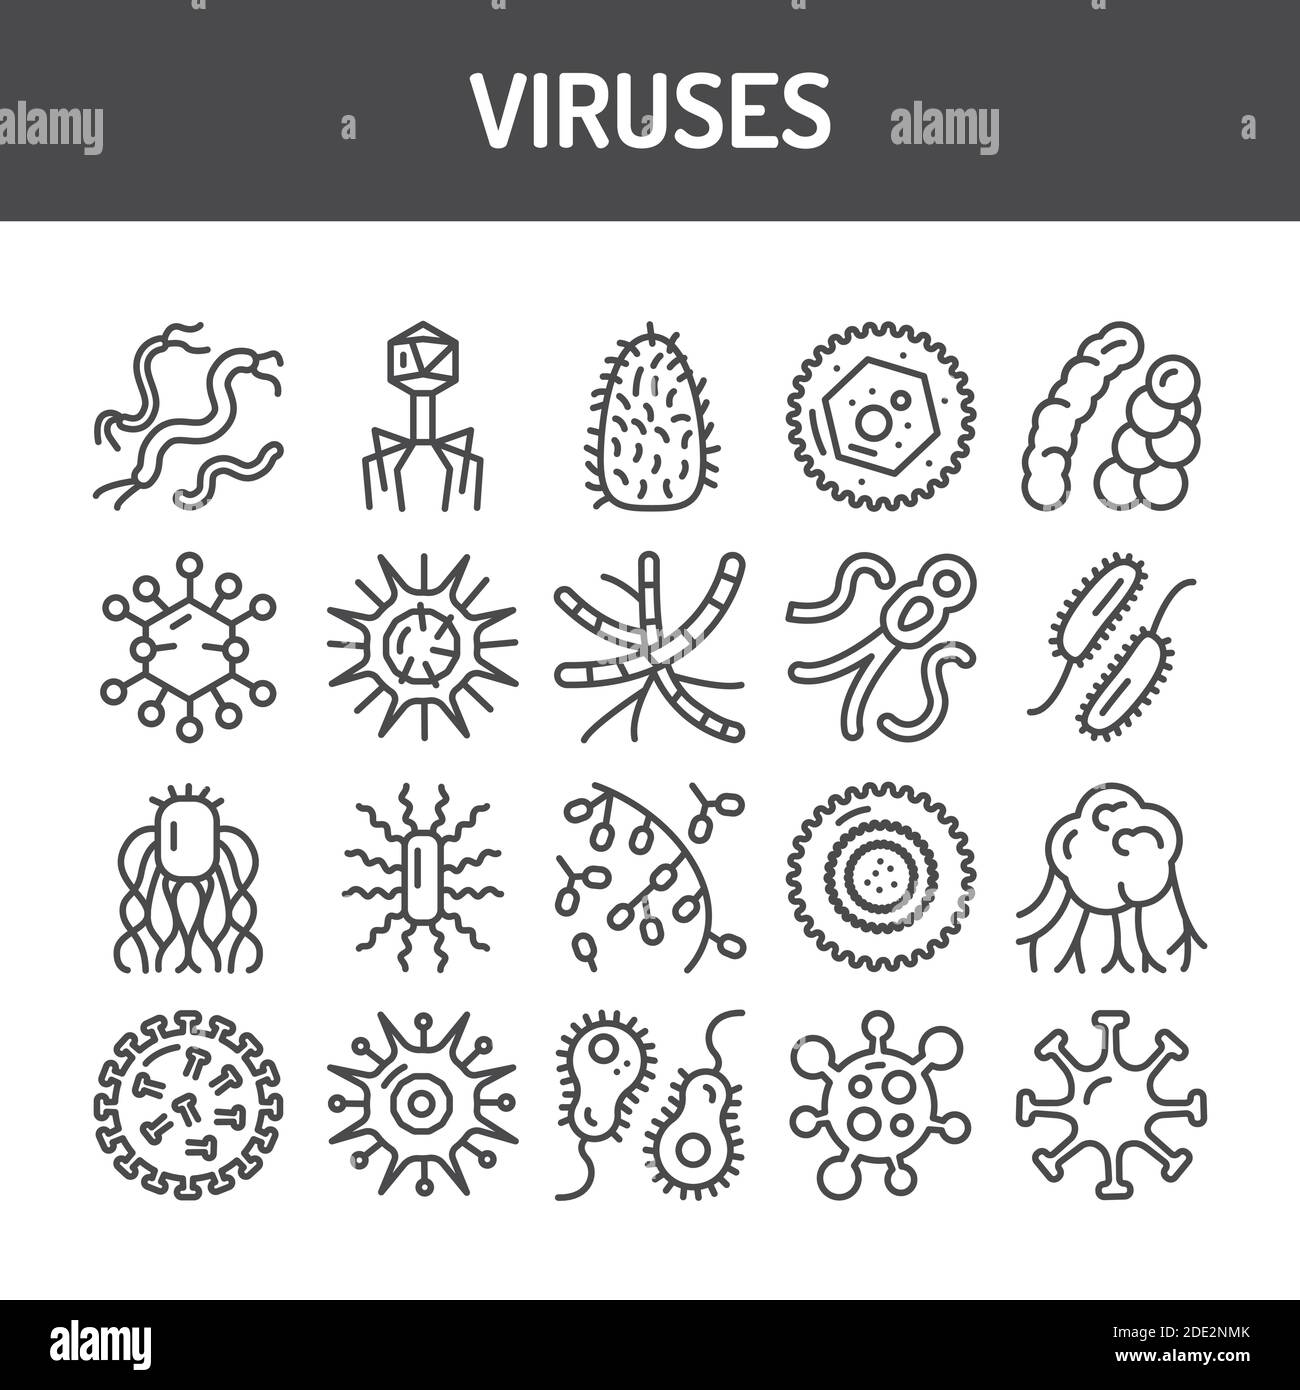 Viruses black line icons set. Respiratory infections. Vector illustration Stock Vector